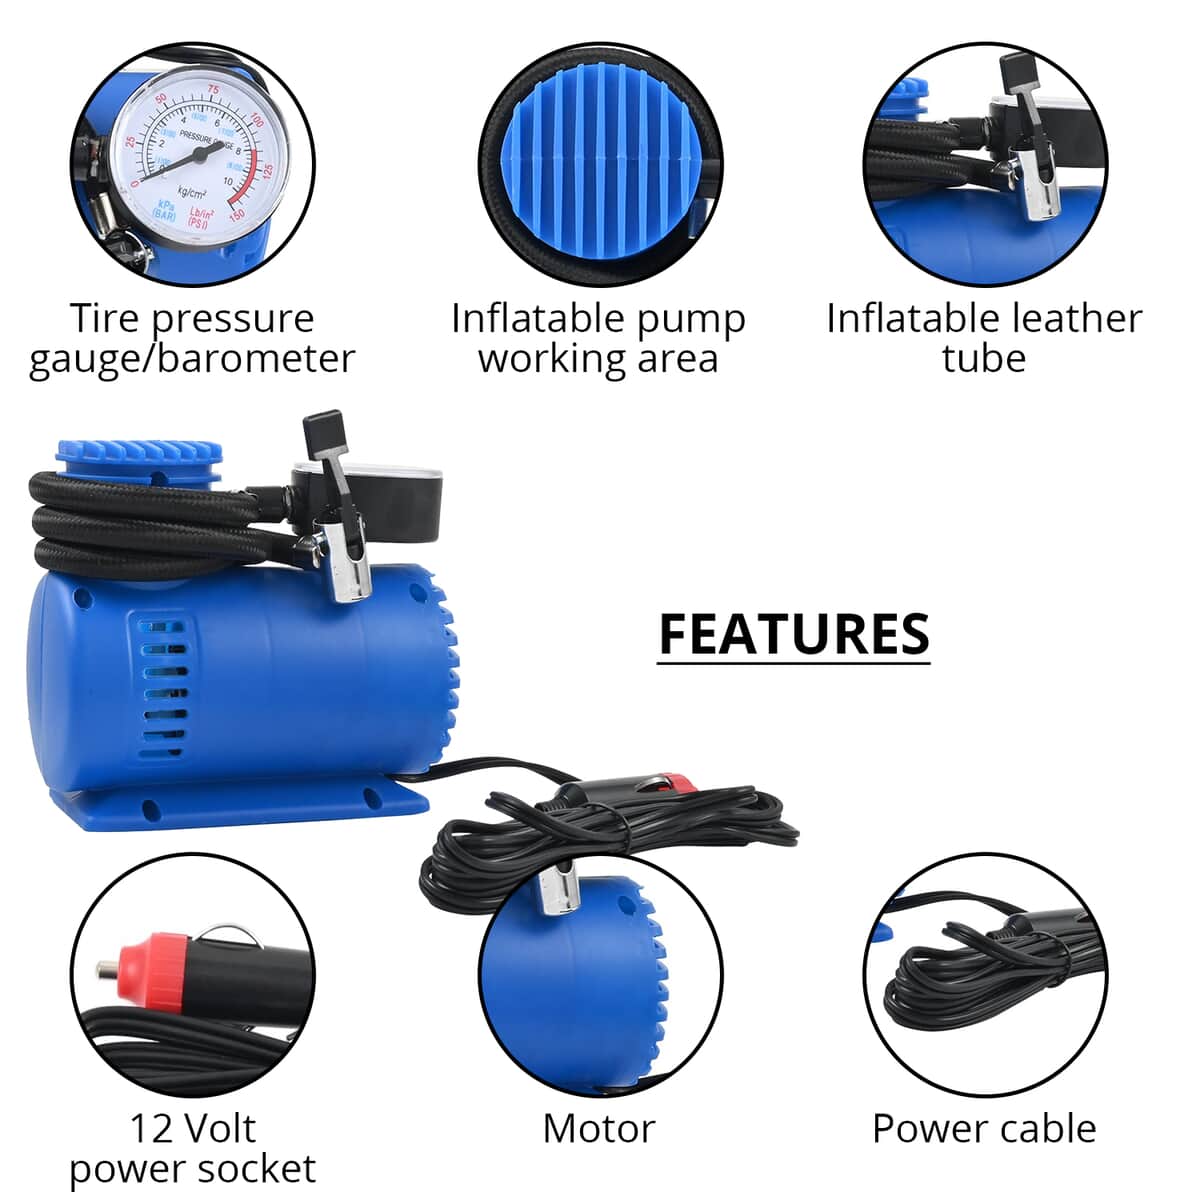 AUTO EFFECTS Blue Portable Mini Air Compressor for Tire Inflation, 12Volt DC Powered, Built-in Pressure Gauge, Inflates Automobile tires, Bike tires image number 2